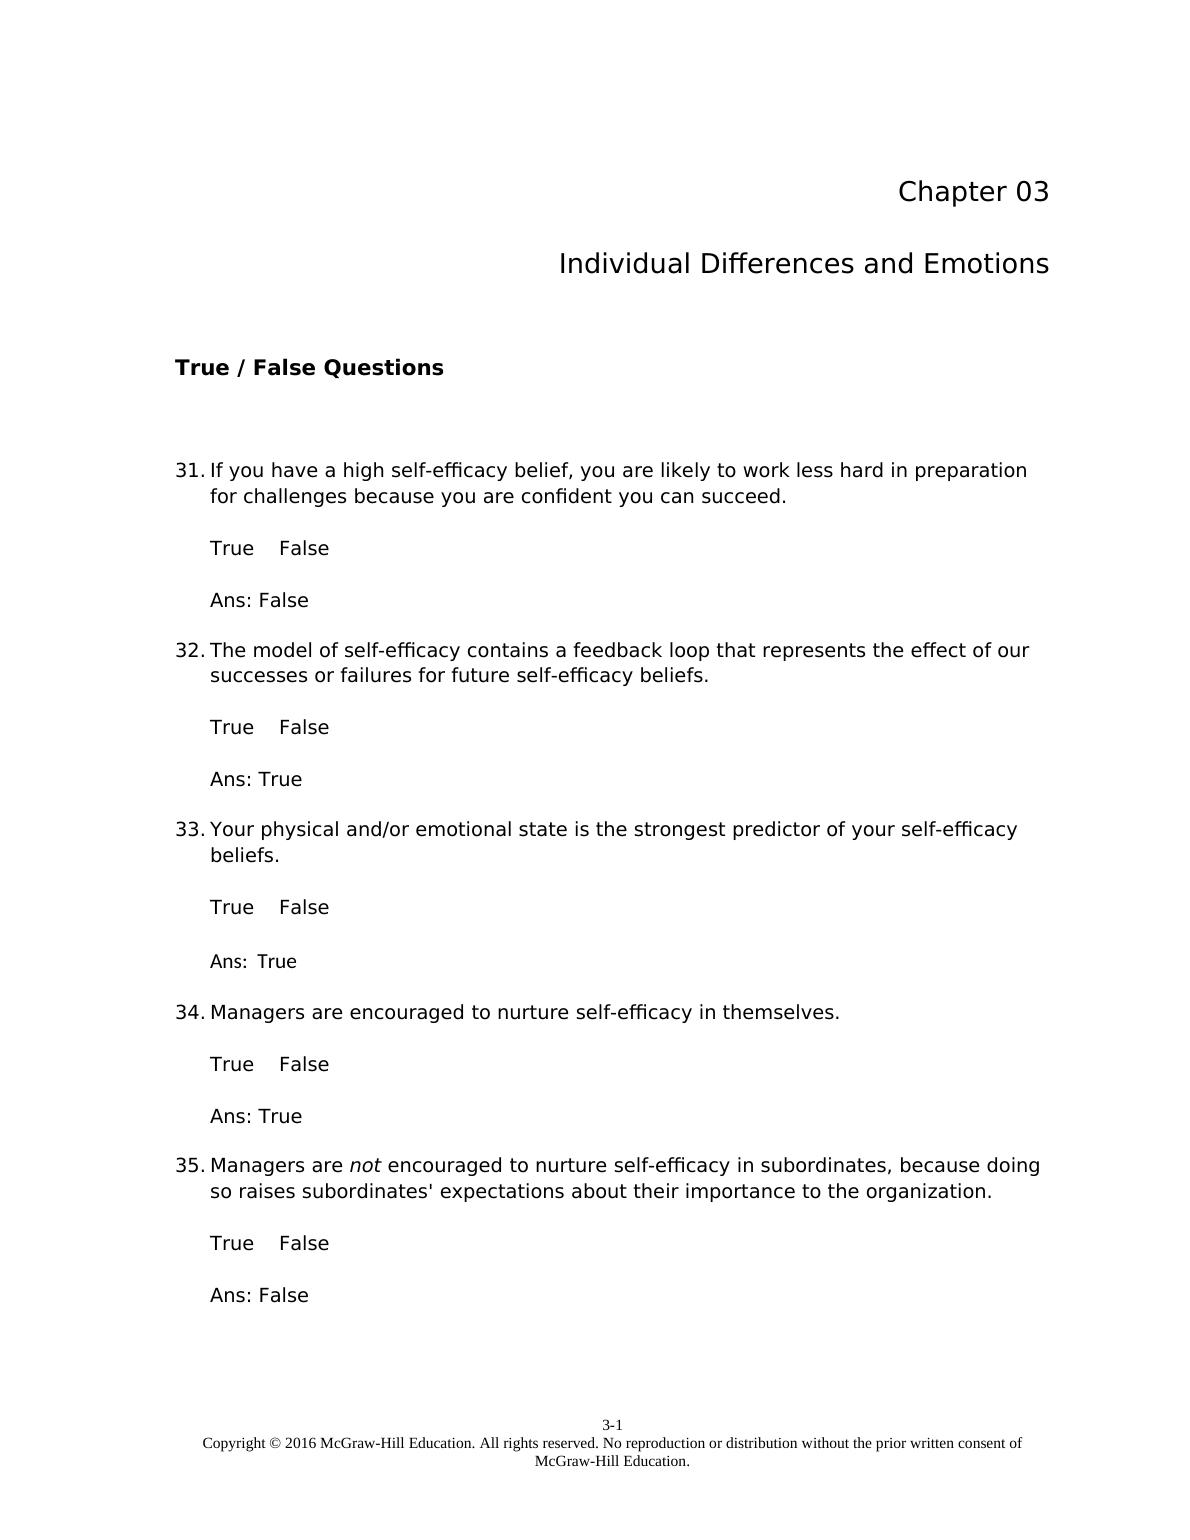 BUSS5069 - Individual Differences and Emotions - Question Answers_1